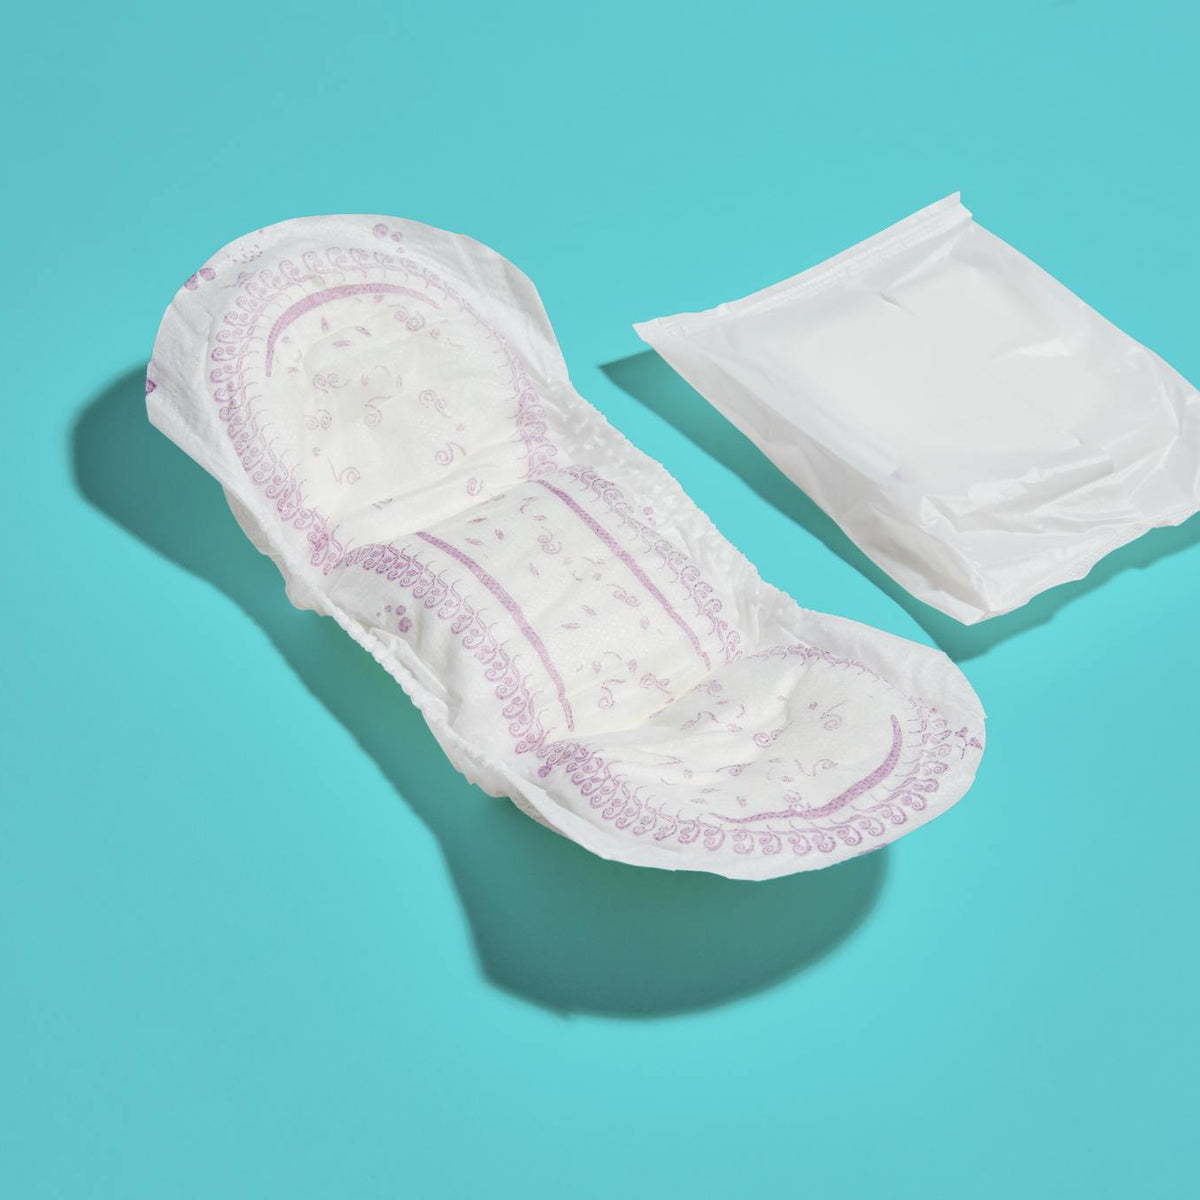 Absorbent products for light bladder leakage in women